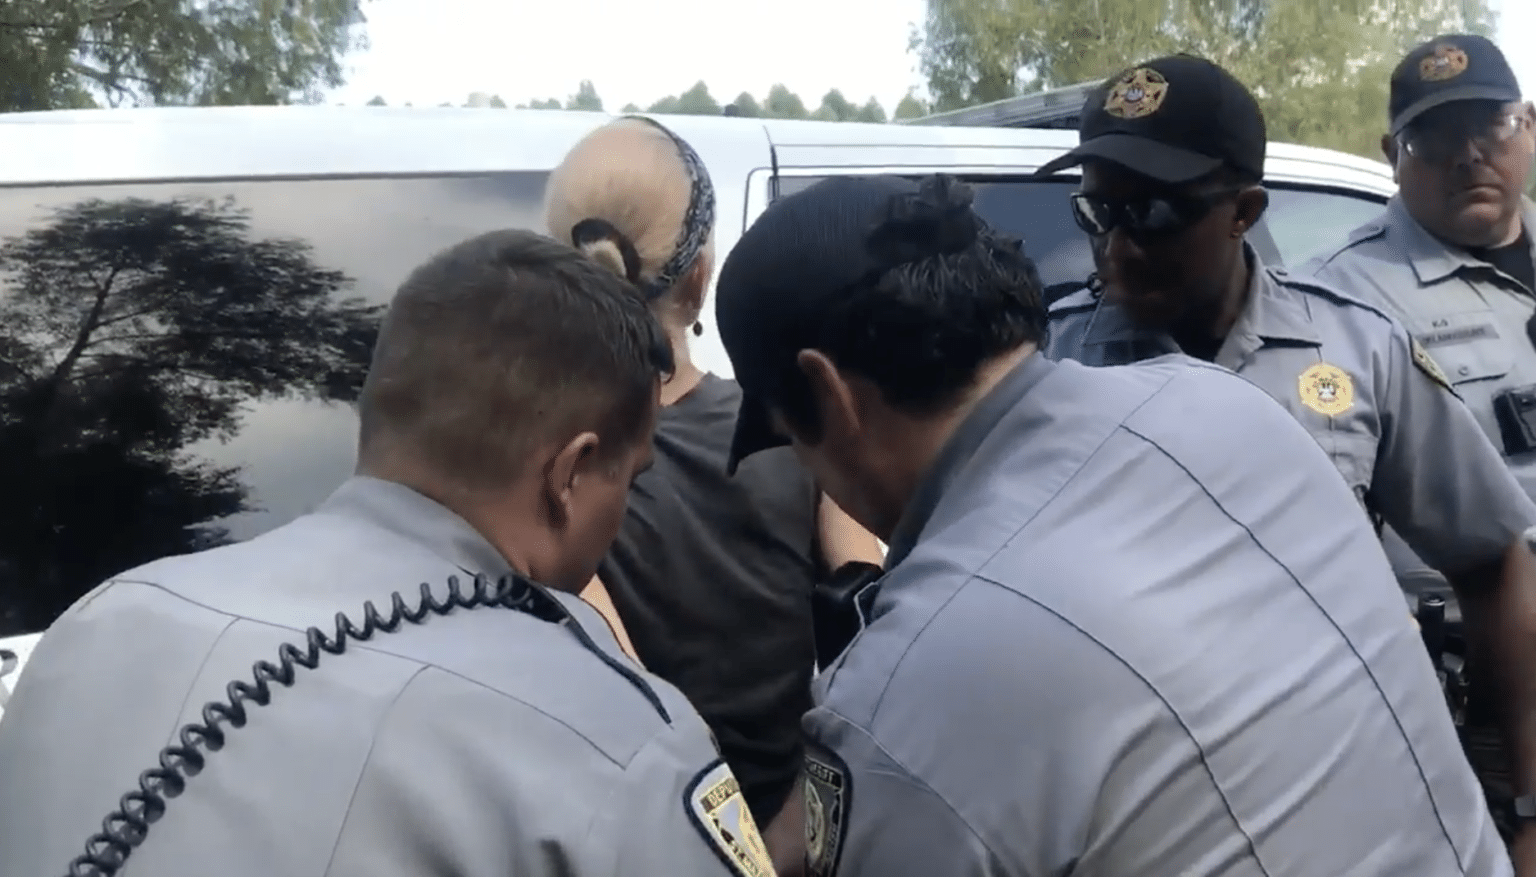 A blonde woman is pressed against an SUV while three men in gray law enforcement uniforms handcuff her, with a fourth looking on